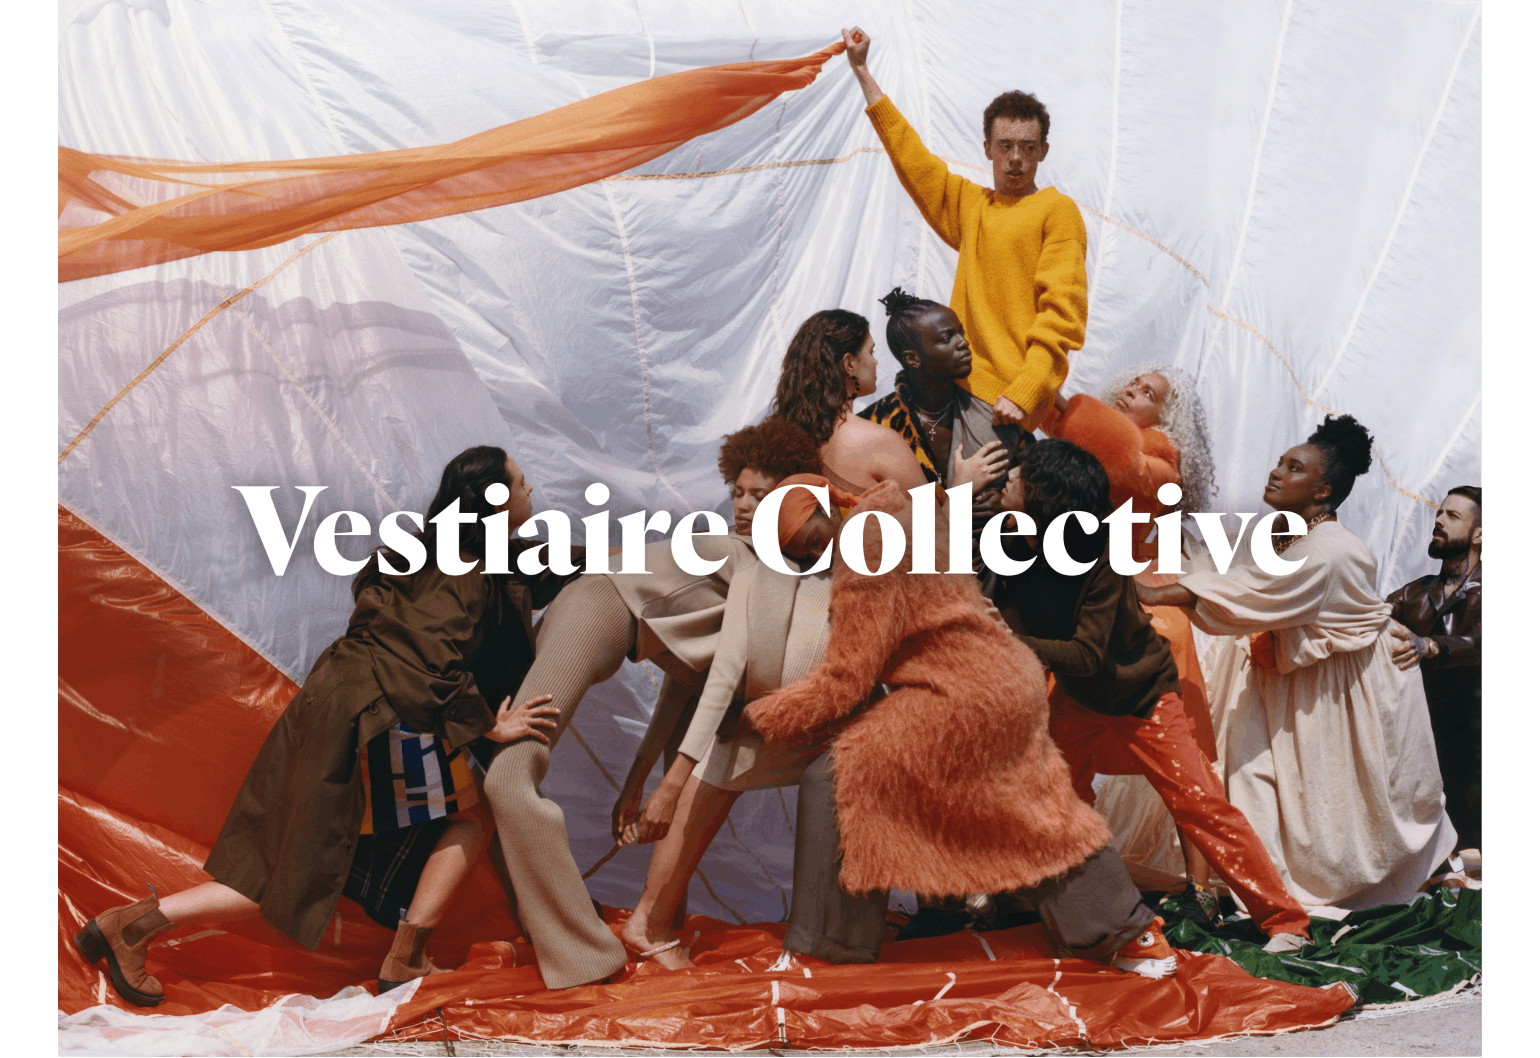 Vestiaire Collective: Sustainable and authenticated fashion